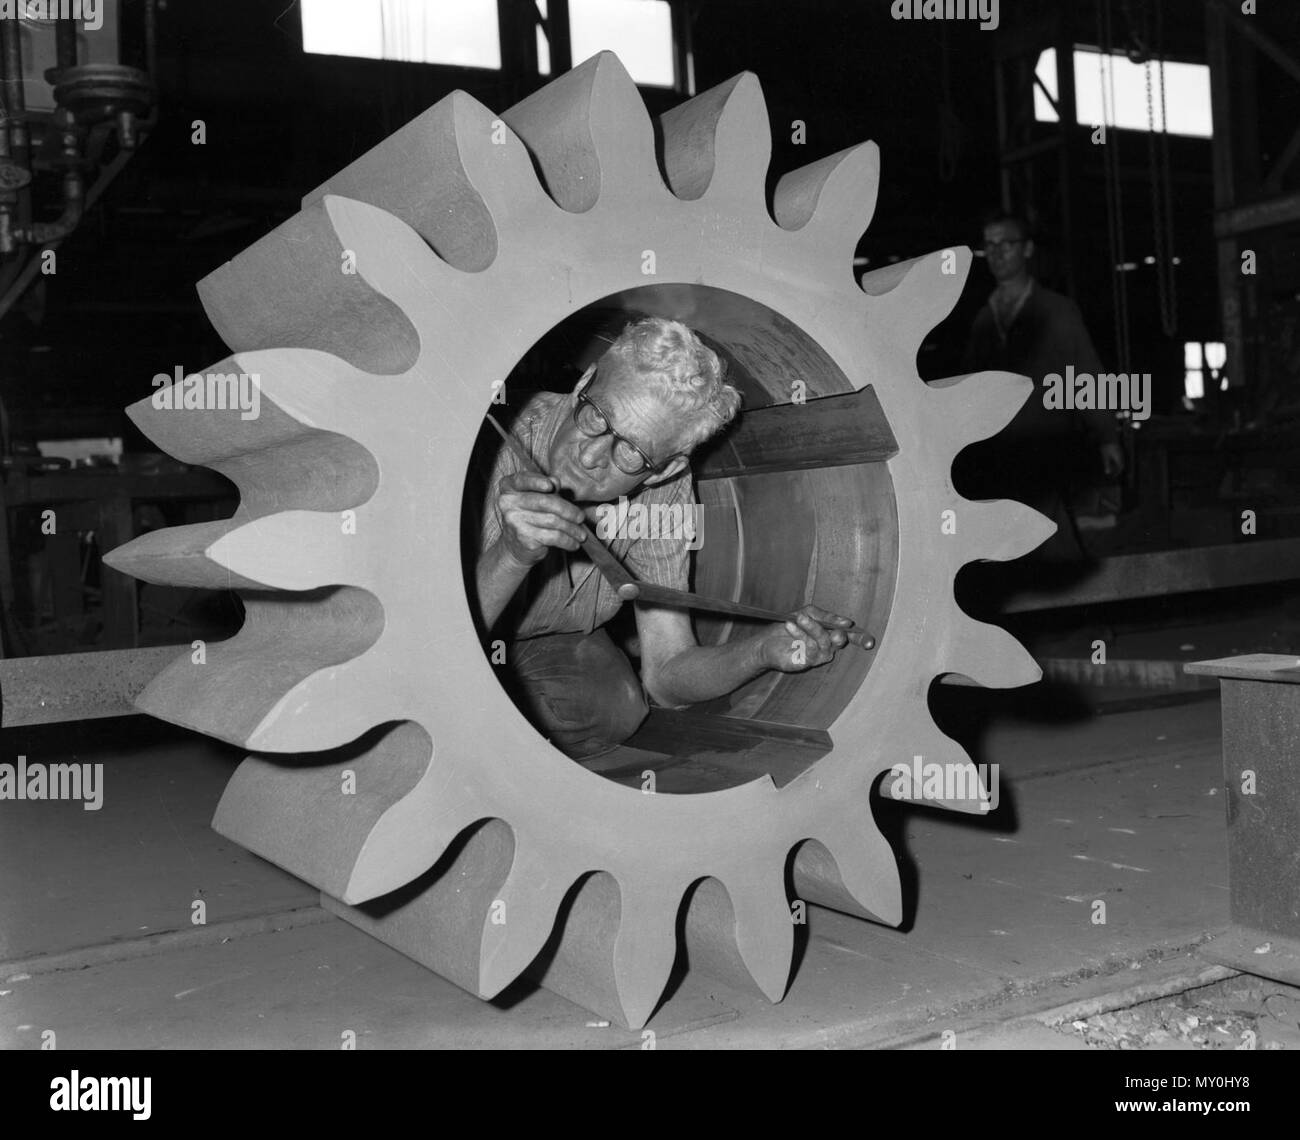 Gear wheel being inspected, Rocklea, 1963. Evans Deakin and Company was an engineering company and shipbuilder based in Brisbane. The Rocklea factory was established in 1926 and fabricated components for the Story Bridge. Stock Photo